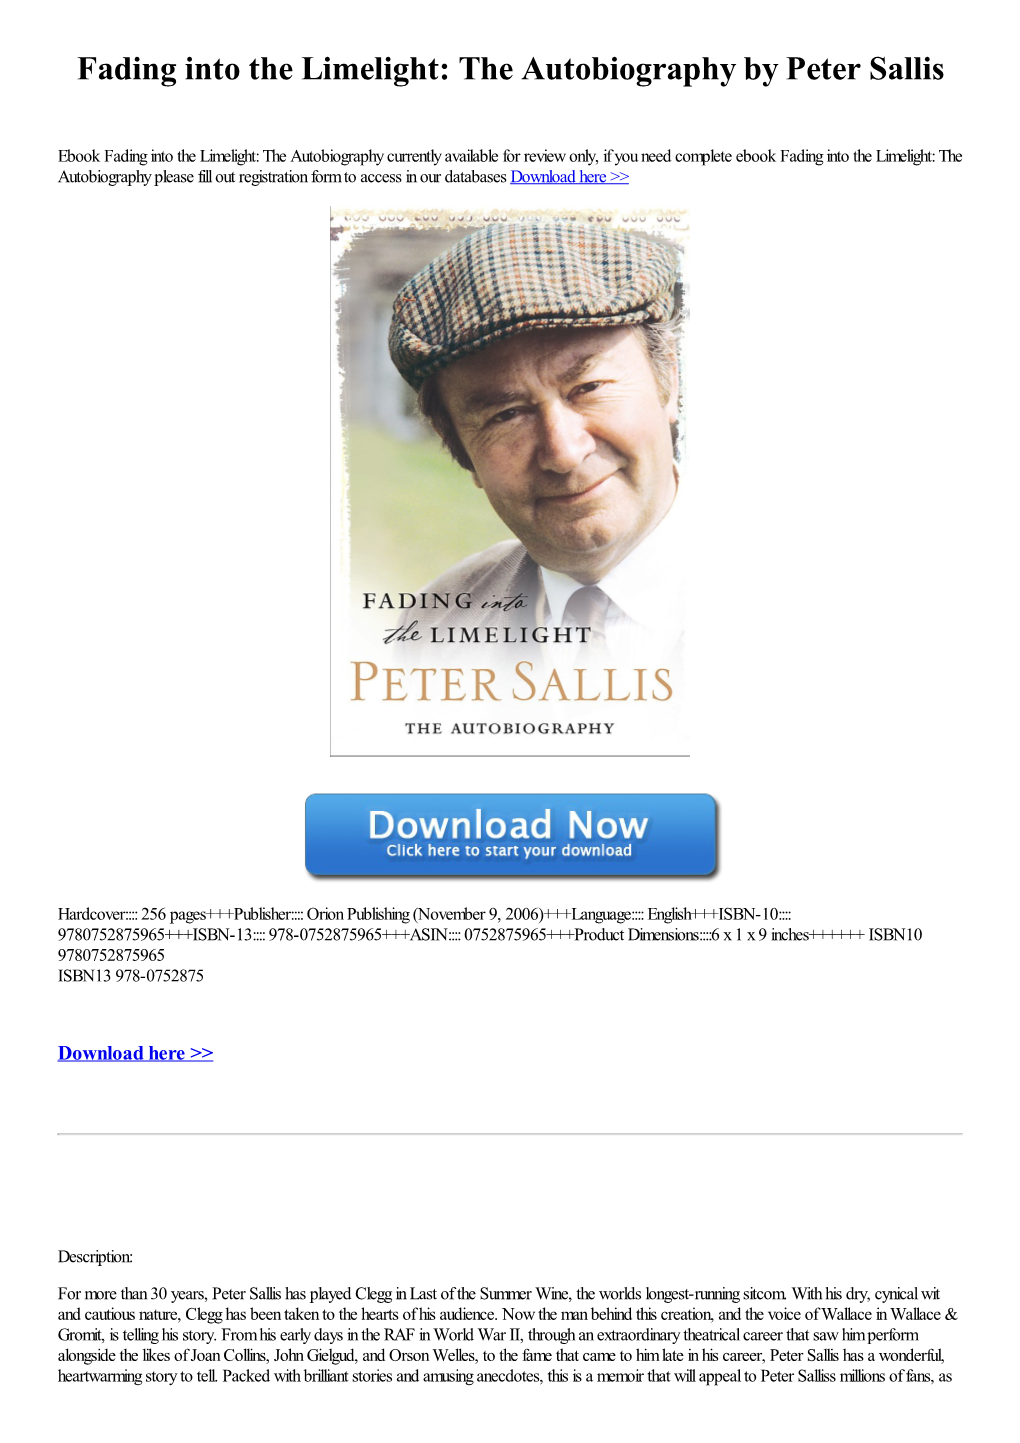 Fading Into the Limelight: the Autobiography by Peter Sallis [Book]